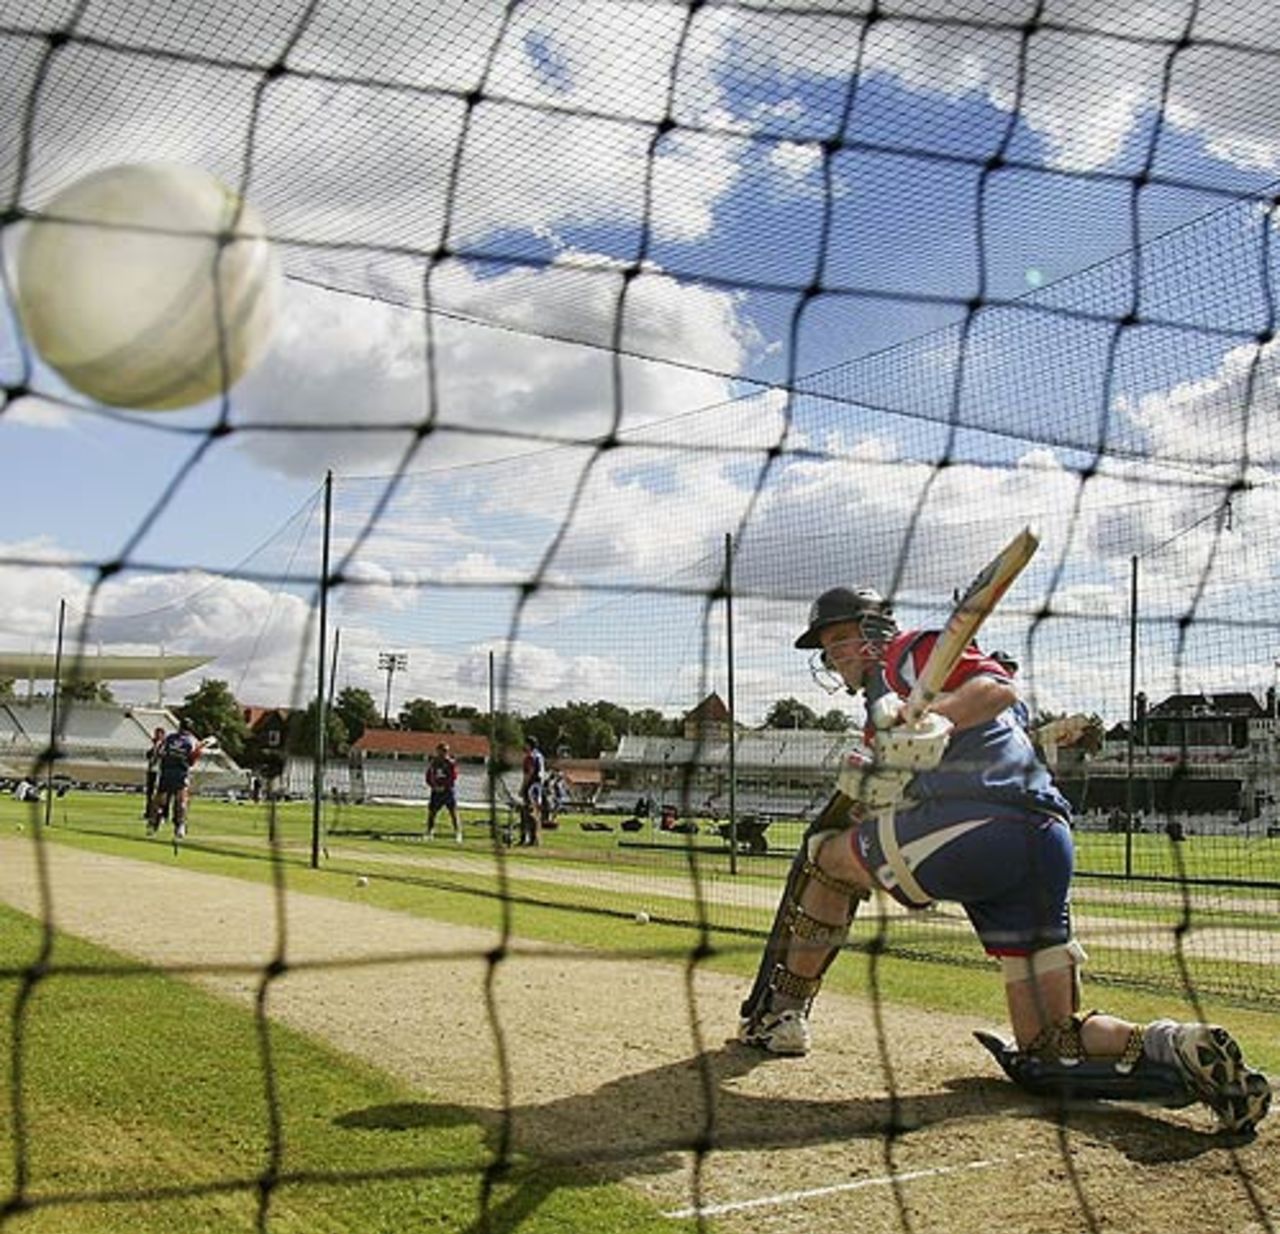 Andrew Strauss sweeps during practice ahead of the fourth one-dayer against Pakistan, Trent Bridge, September 7, 2006